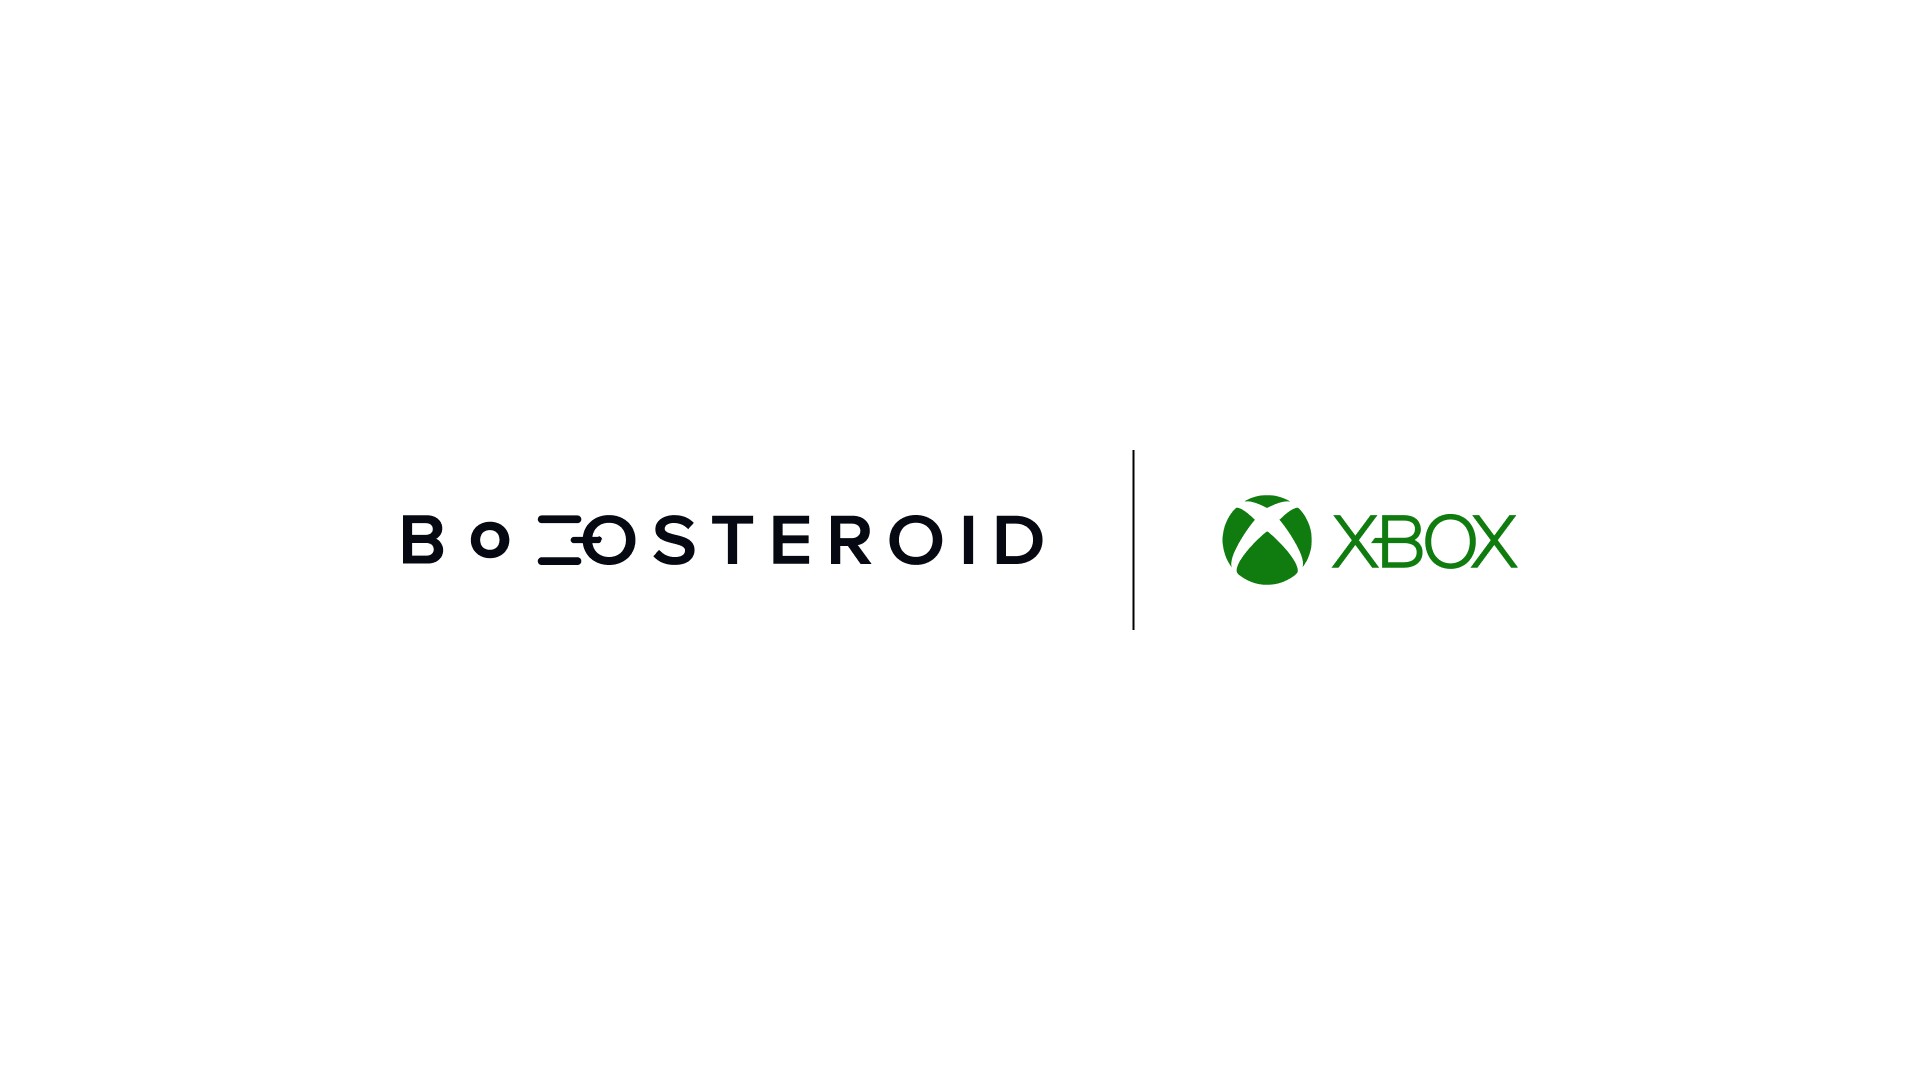 PC Games from Xbox Headed to Boosteroid Customers June 1 - Xbox Wire